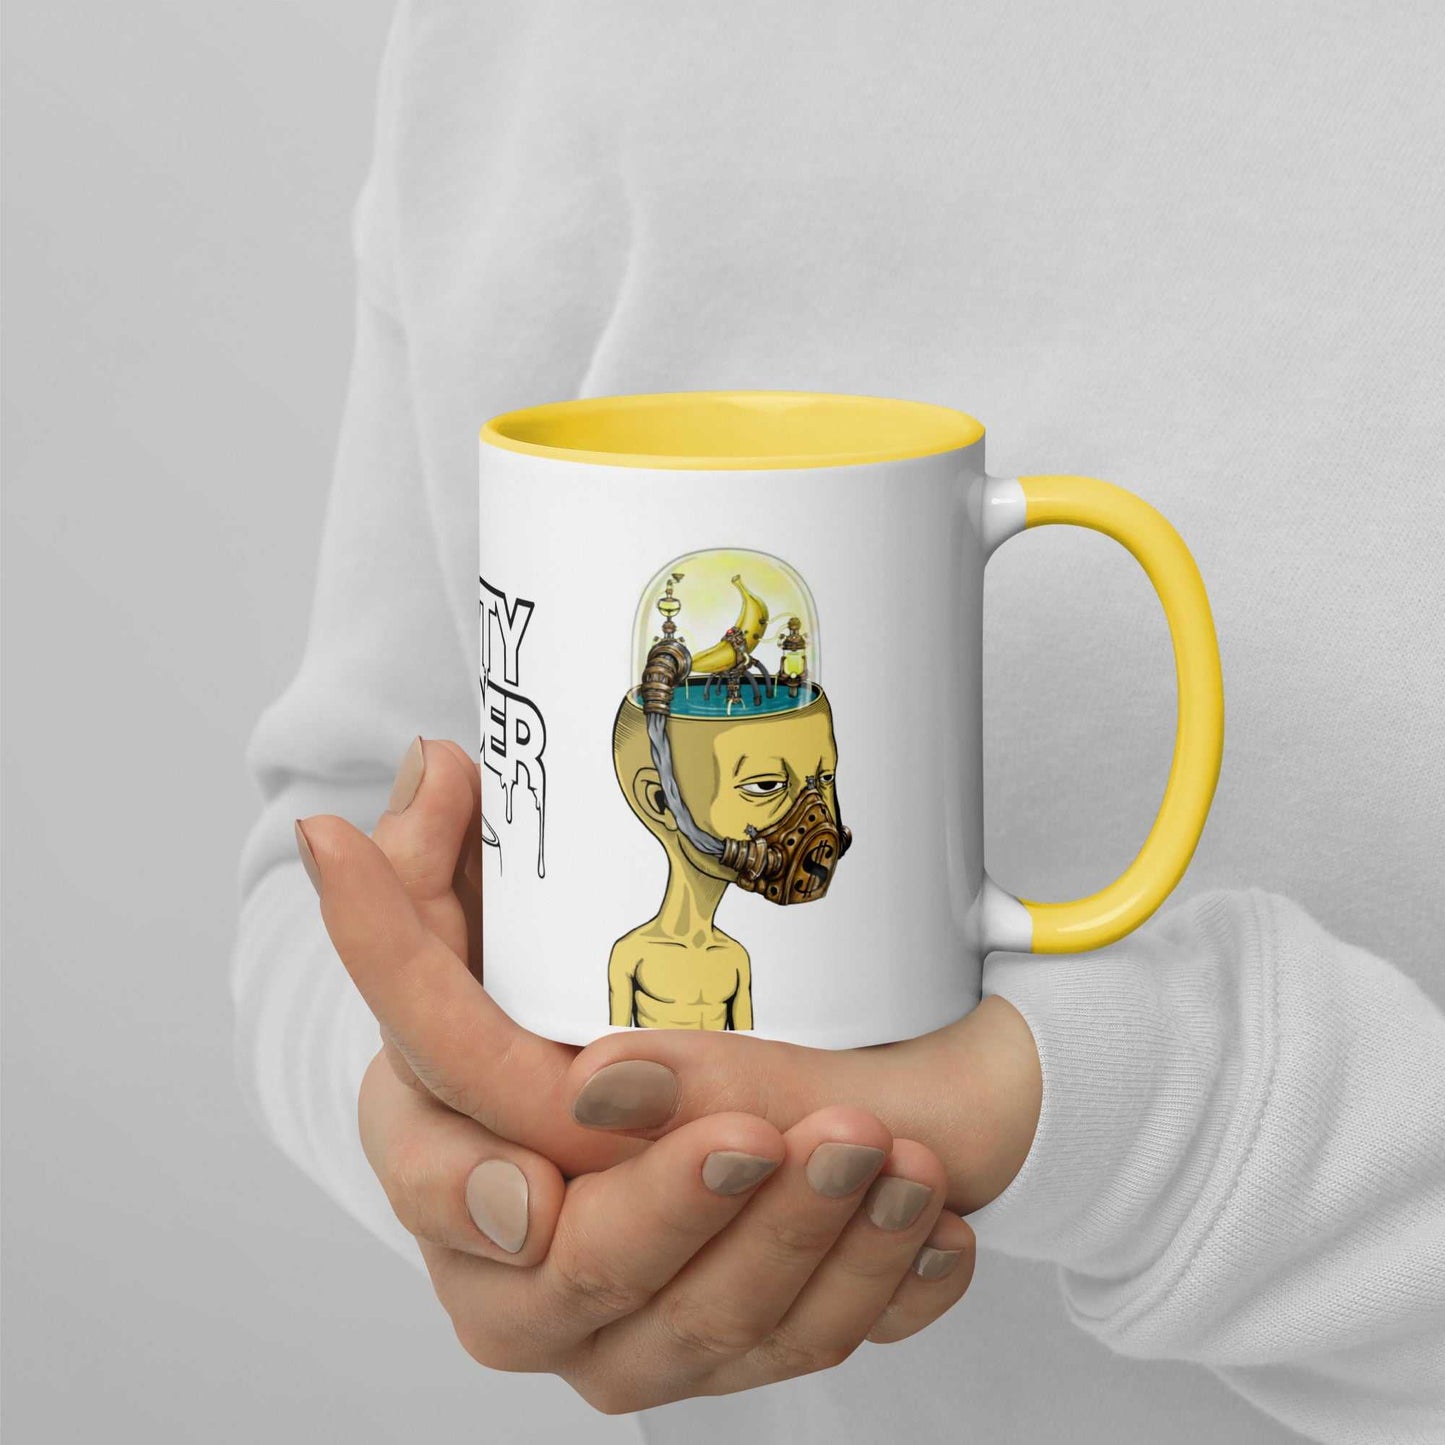 Banana Mind White Glossy MugIntroducing our delightful Banana Mind Mug! Sip your favorite beverages in style with this vibrant yellow mug that will surely bring a smile to your face. Featuring F.U. ShopHOZZY Artistry Store